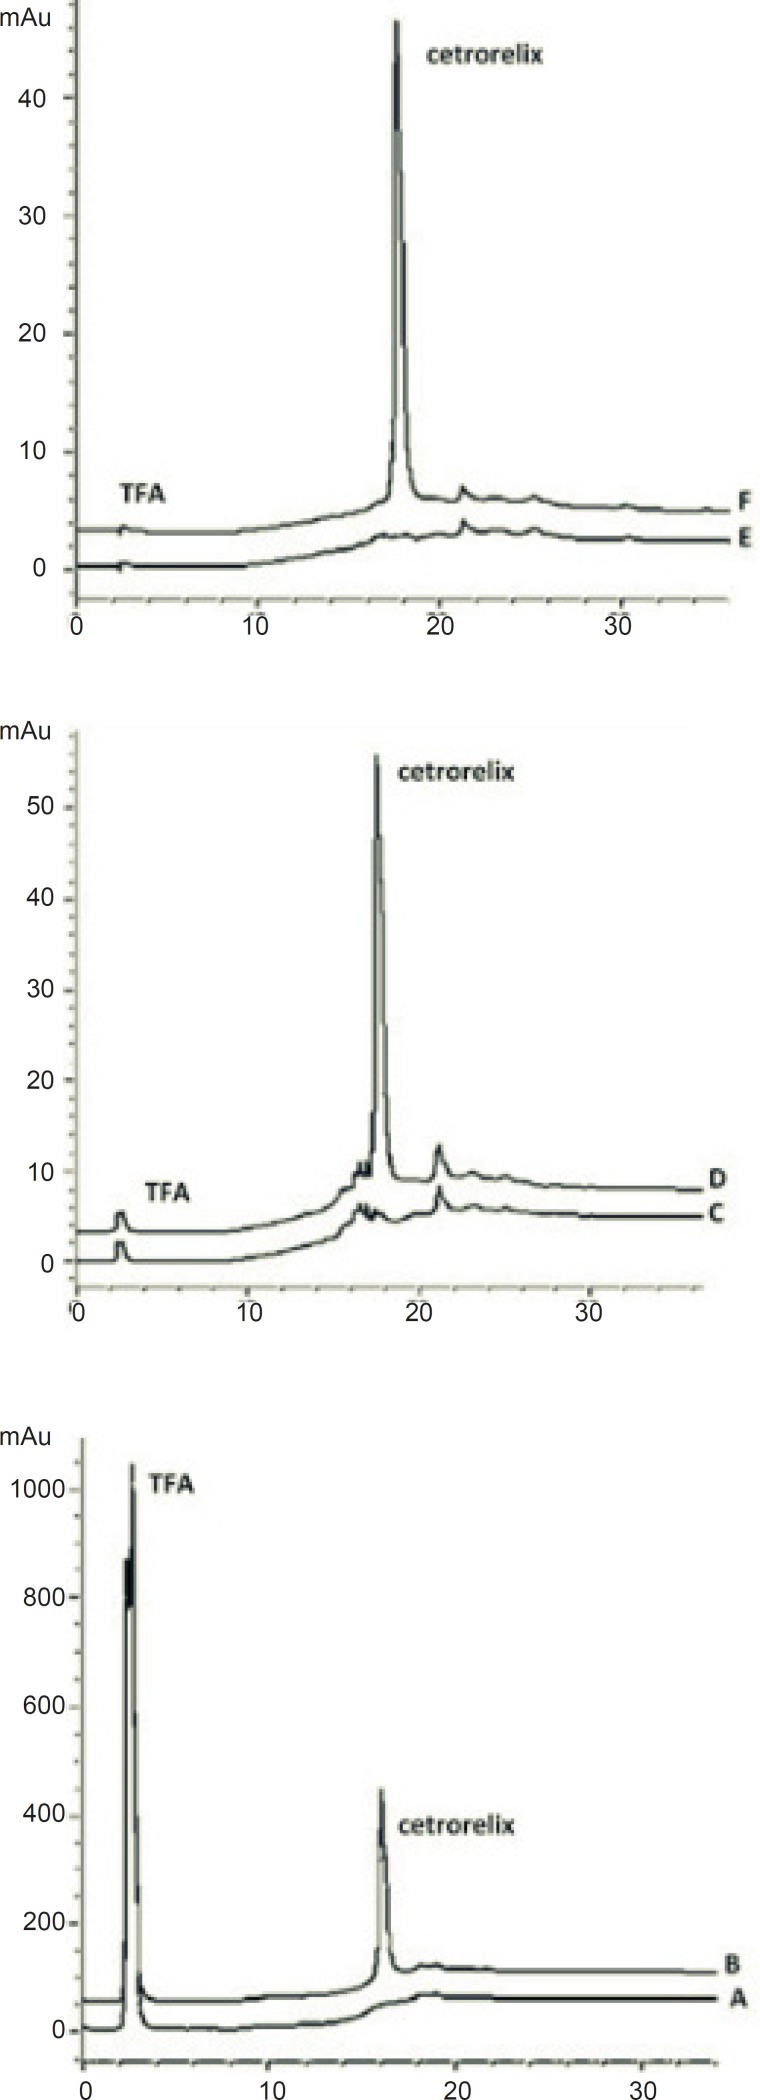 Chromatograms of: (A) blank sample (deionized water) in 230 nm (B) standard solution, 125 μg/mL cetrorelix as acetate in 230 nm (C) blank sample (deionized water) in 265 nm (D) standard solution, 125 μg/mL cetrorelix as acetate in 265 nm (E) blank sample (deionized water) in 275 nm (F) standard solution, 125 μg/mL cetrorelix as acetate in 230 nm